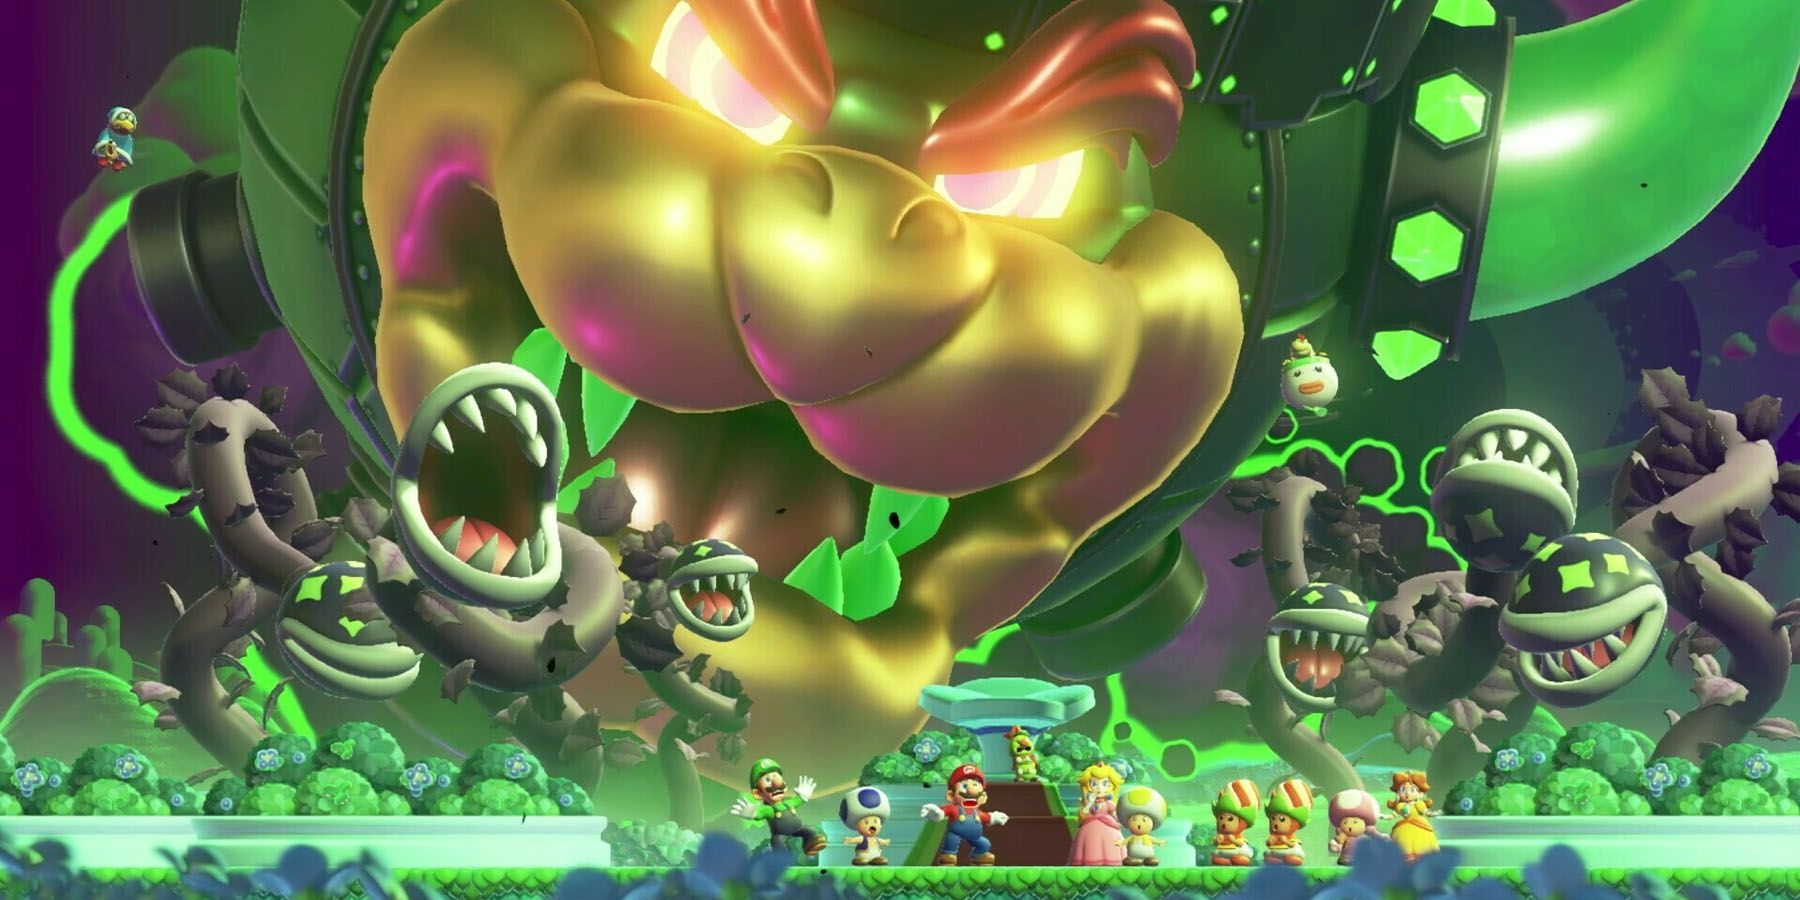 A screenshot of Bowser's fortress threatening Mario and his friends in Super Mario Bros. Wonder.